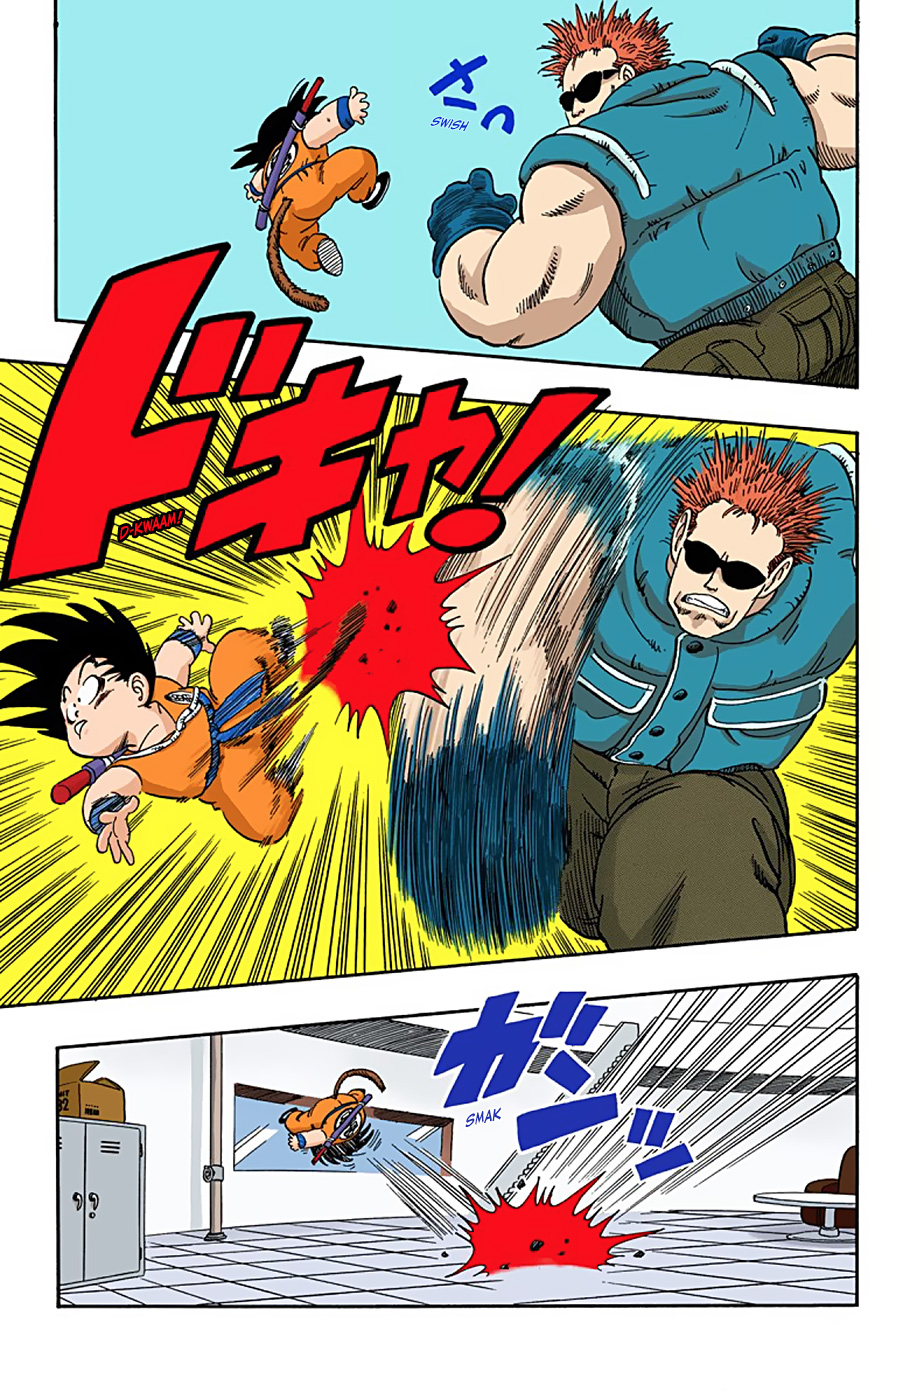 Dragon Ball Full Color Edition Vol. 5 Ch. 59 The Demon on the Third Floor!!